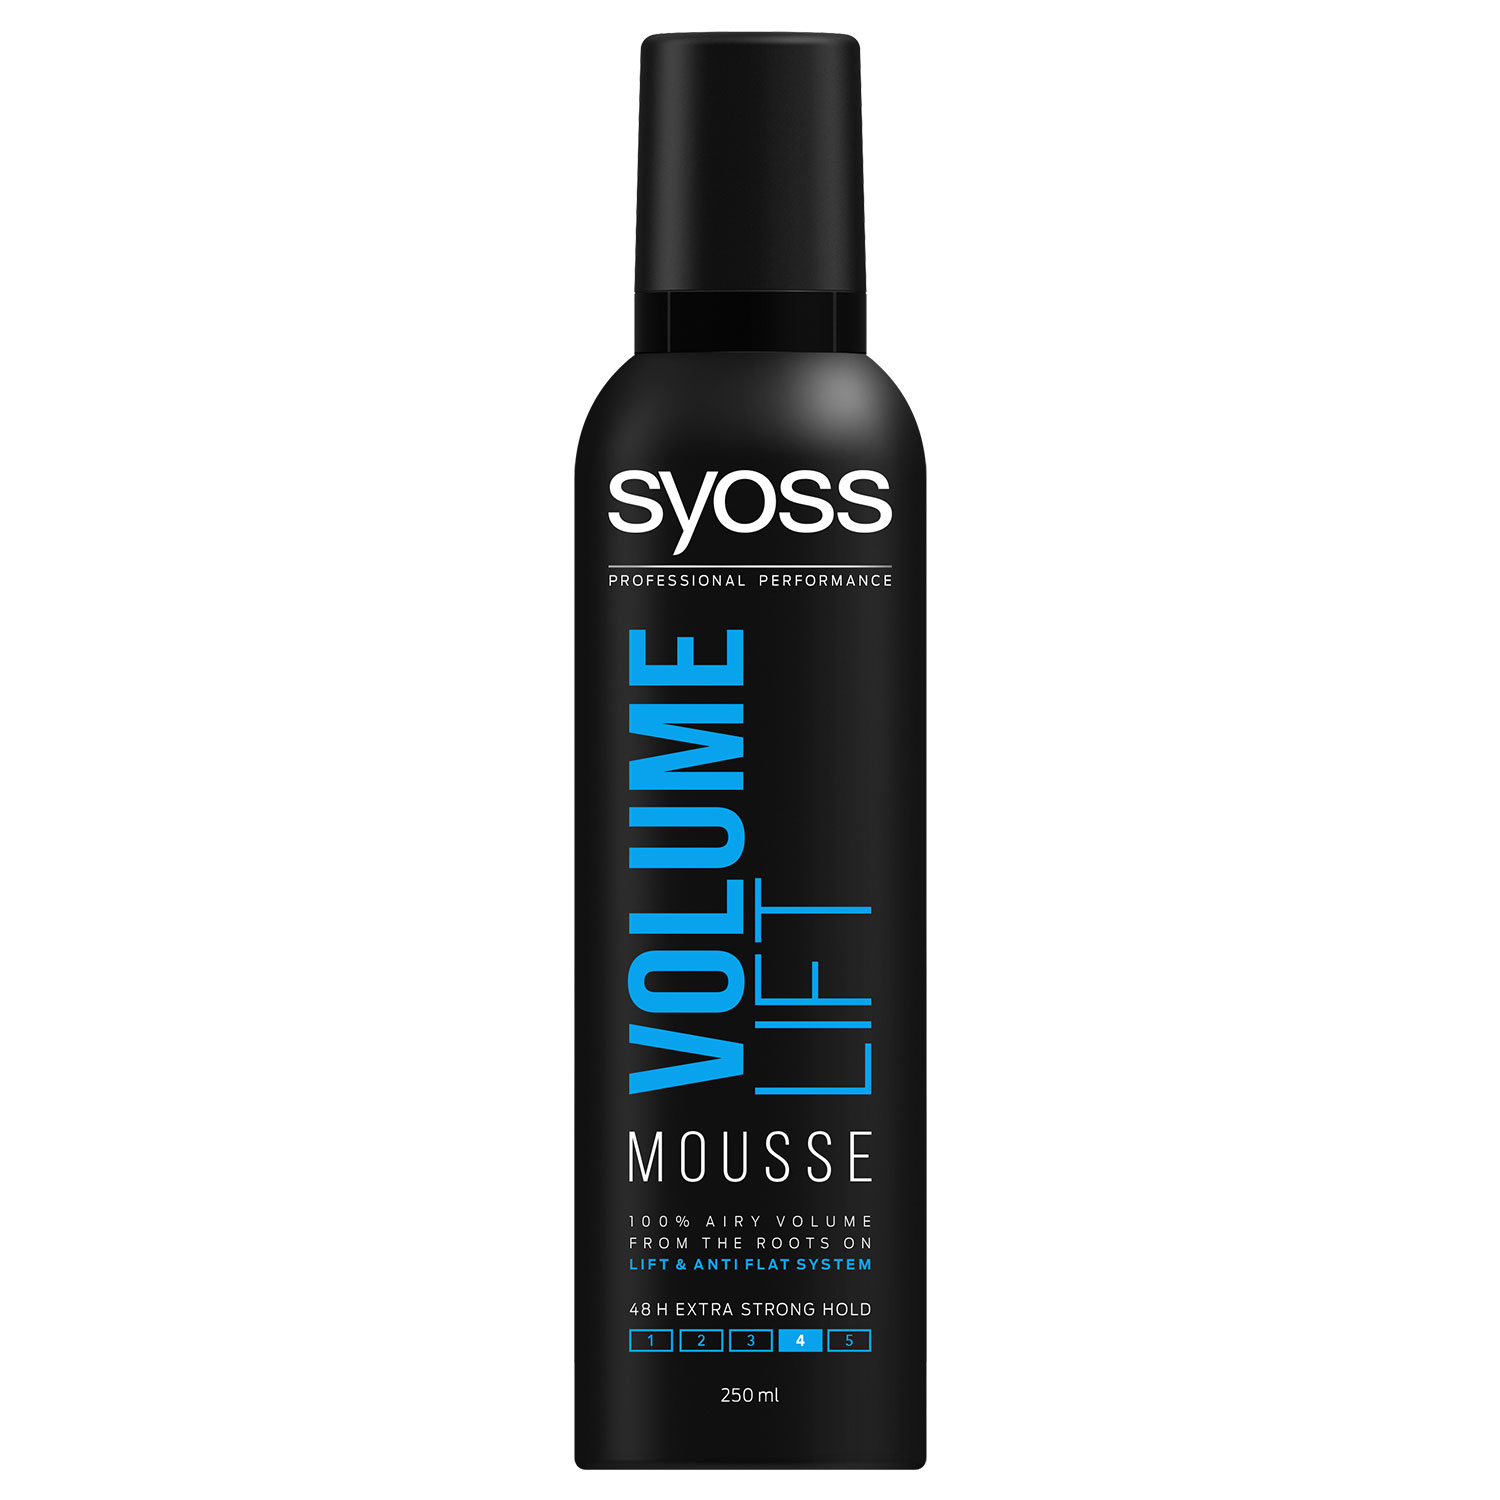 Foam mousse Syoss Volume Lift Fixation 4 for hair 250ml